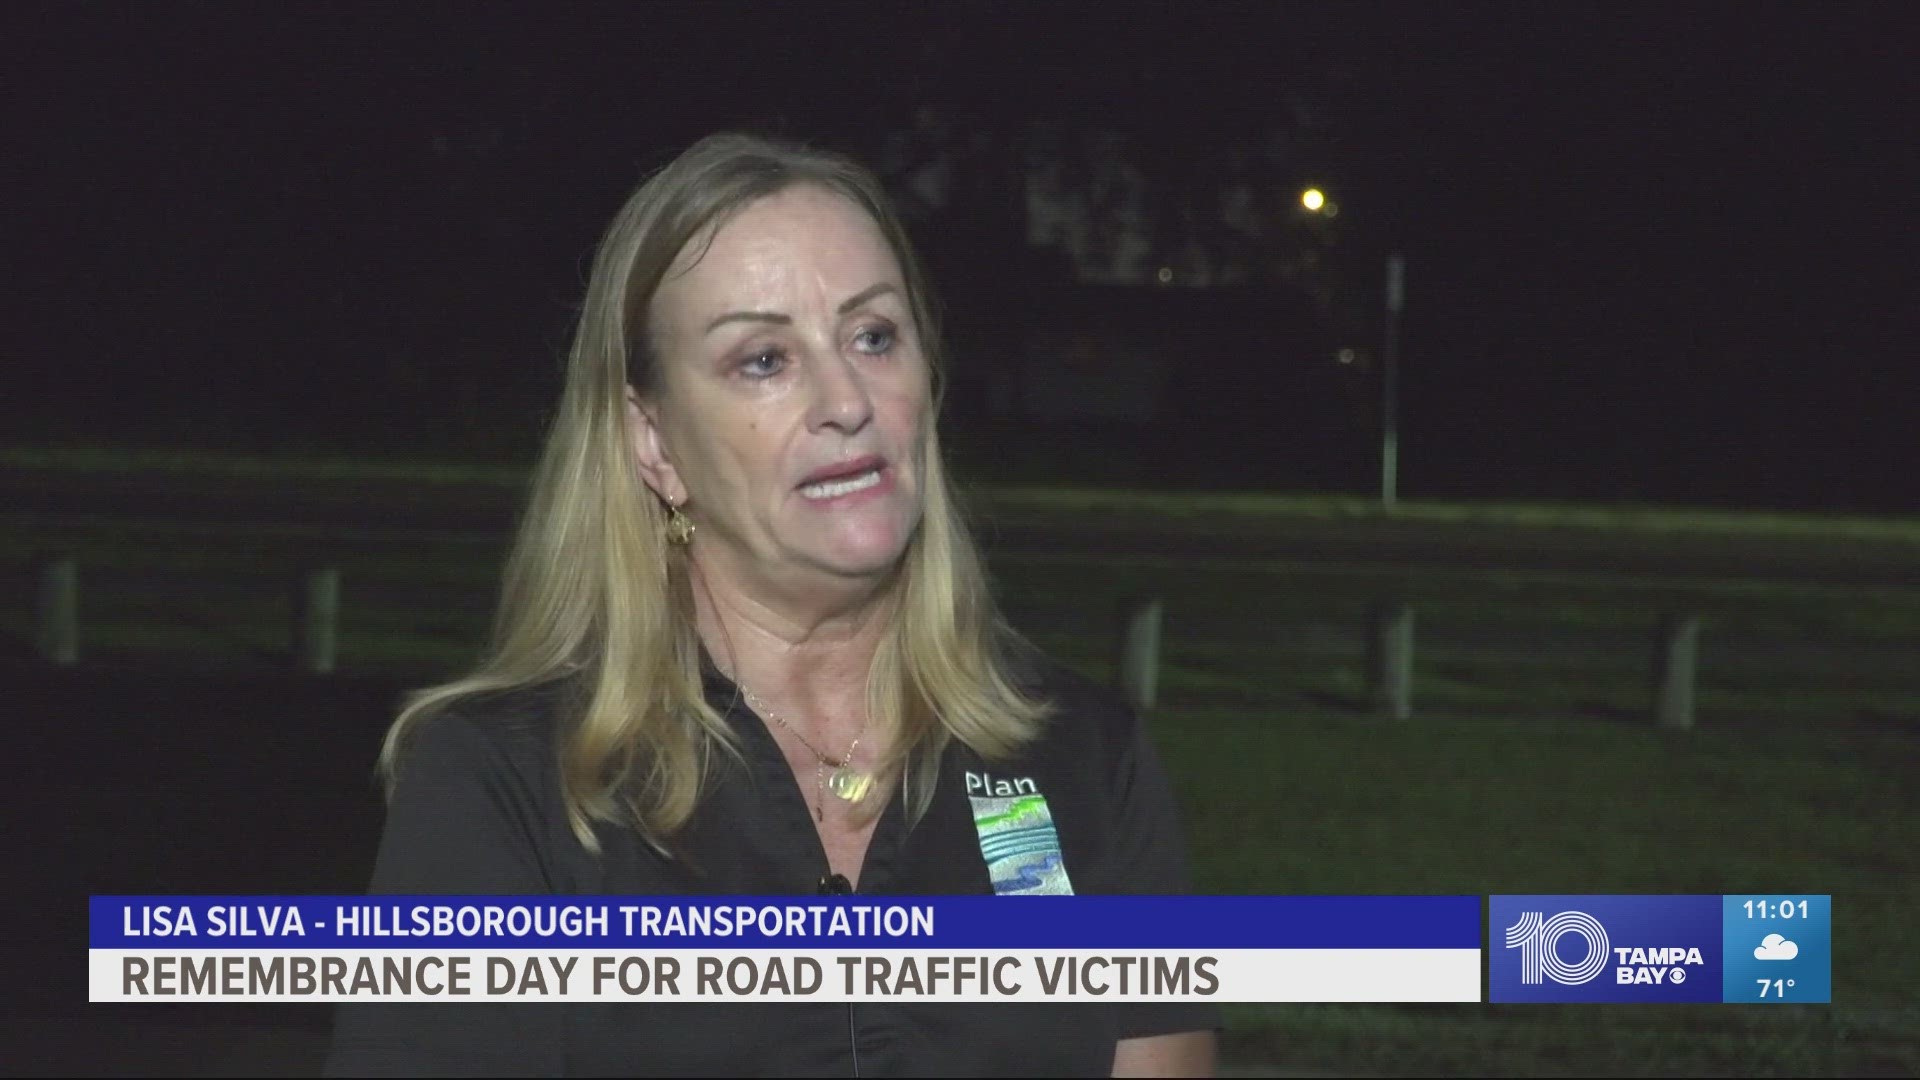 According to Hillsborough Transportation, eight lives are lost and 49 people are left severely injured on Florida roads every day.